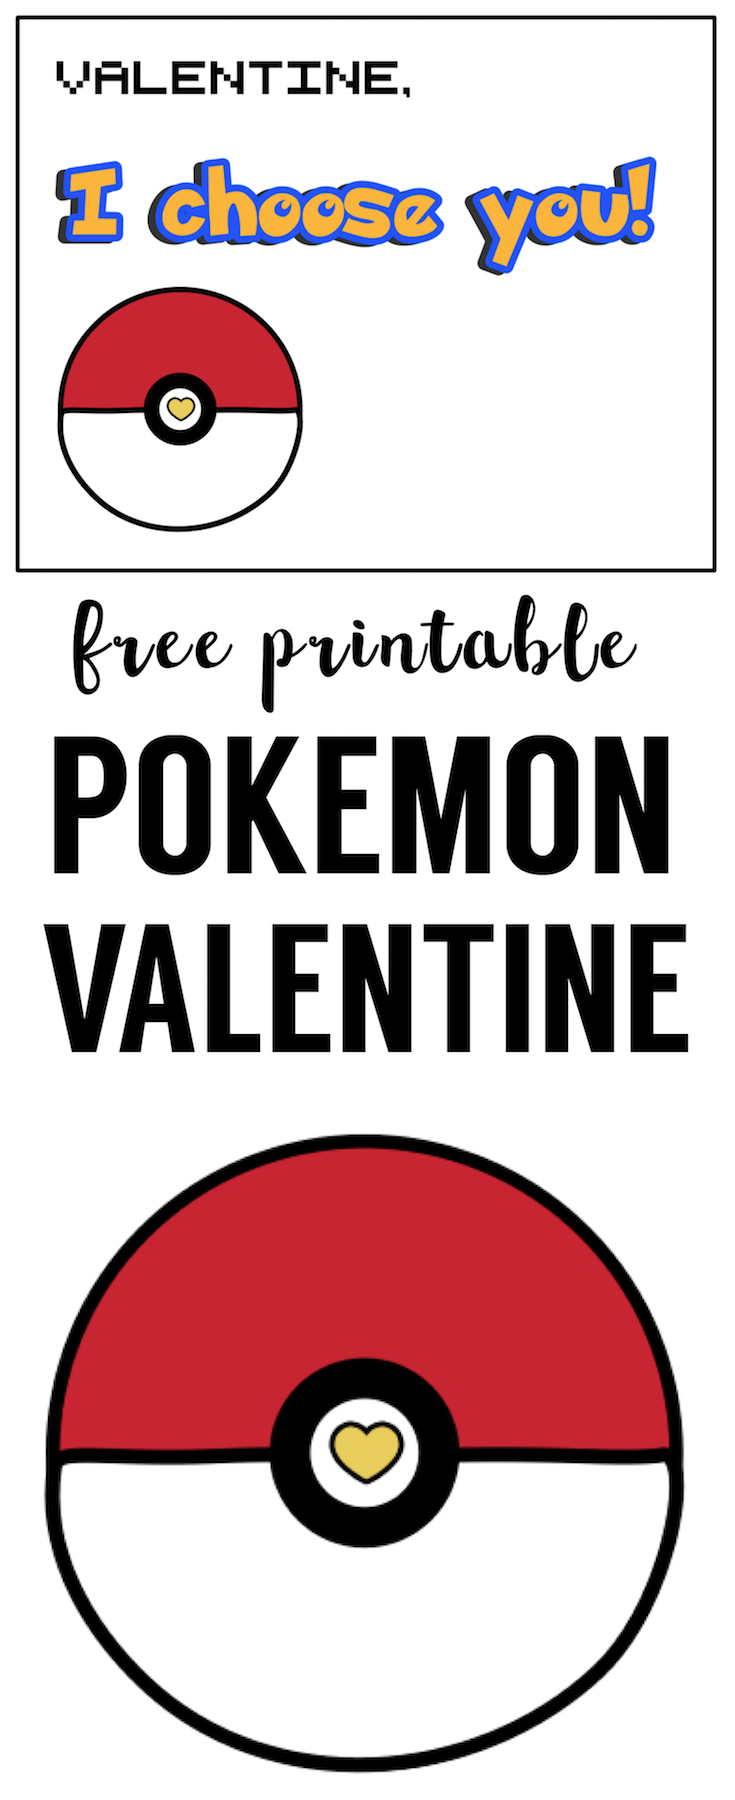 Free Printable Pokémon Valentine Cards. These DIY Pokemon Valentine Cards are easy to make for your kids valentine exchange. An easy no candy valentine.